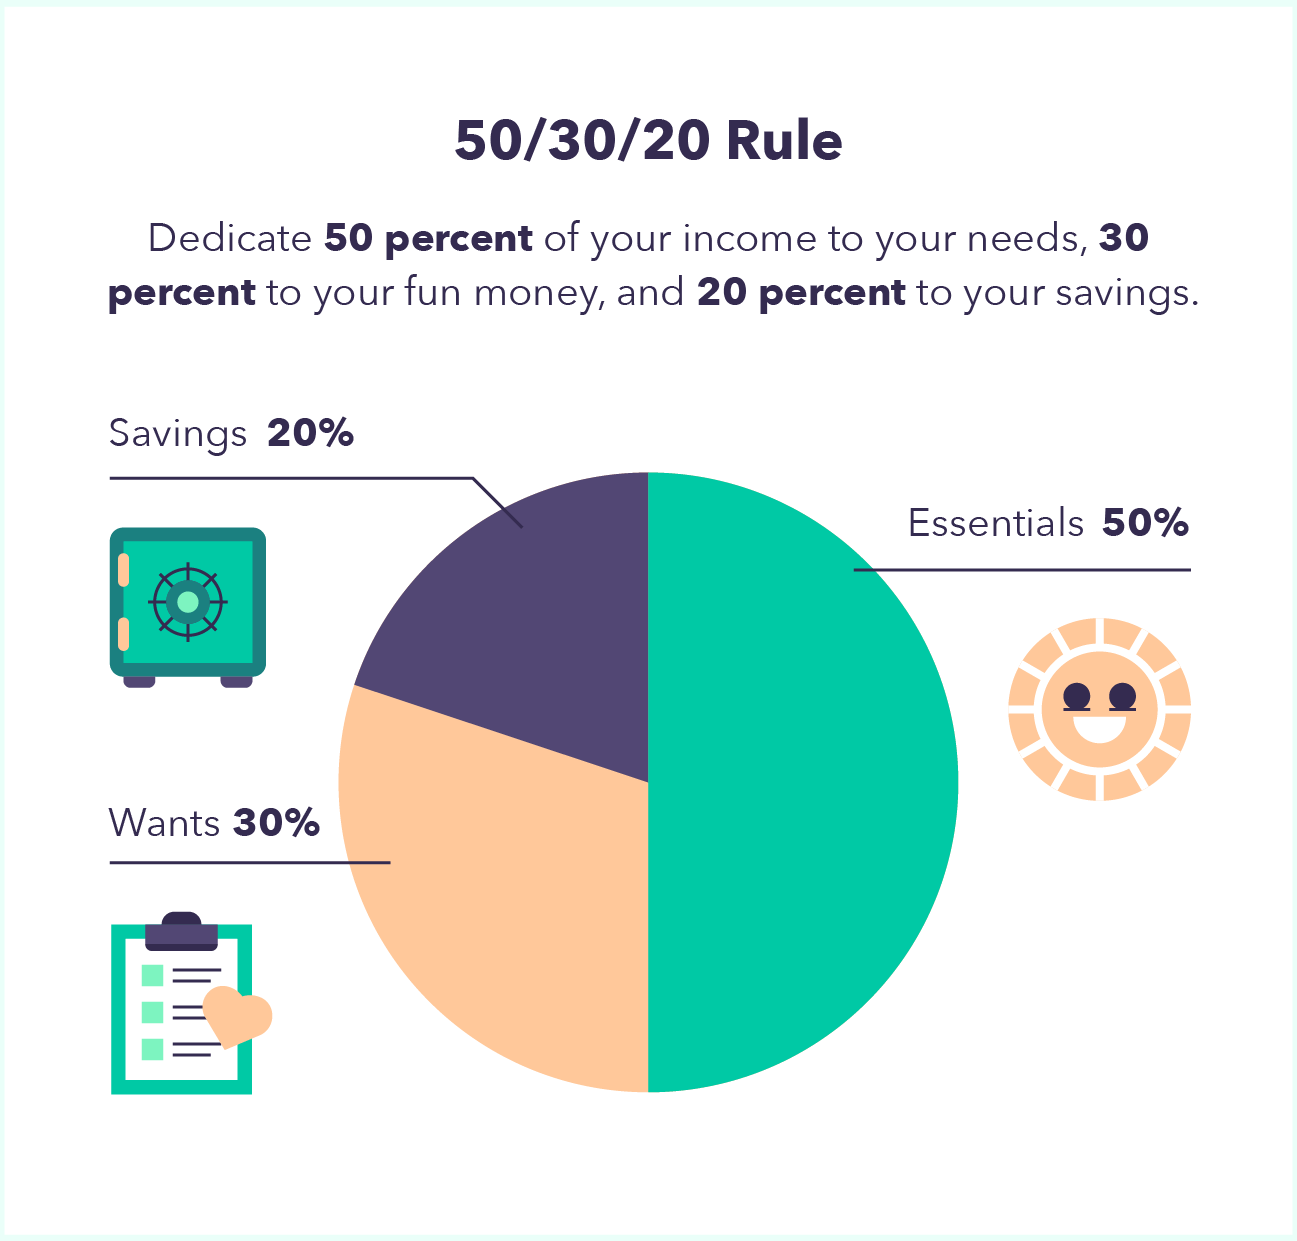 A pie chart overviews how to leverage the 50/30/20 rule for fun money: With the 50/30/20 budgeting method you spend 50 percent of your income on needs, 30 percent is fun money, and 20 percent is for savings and debt payments.